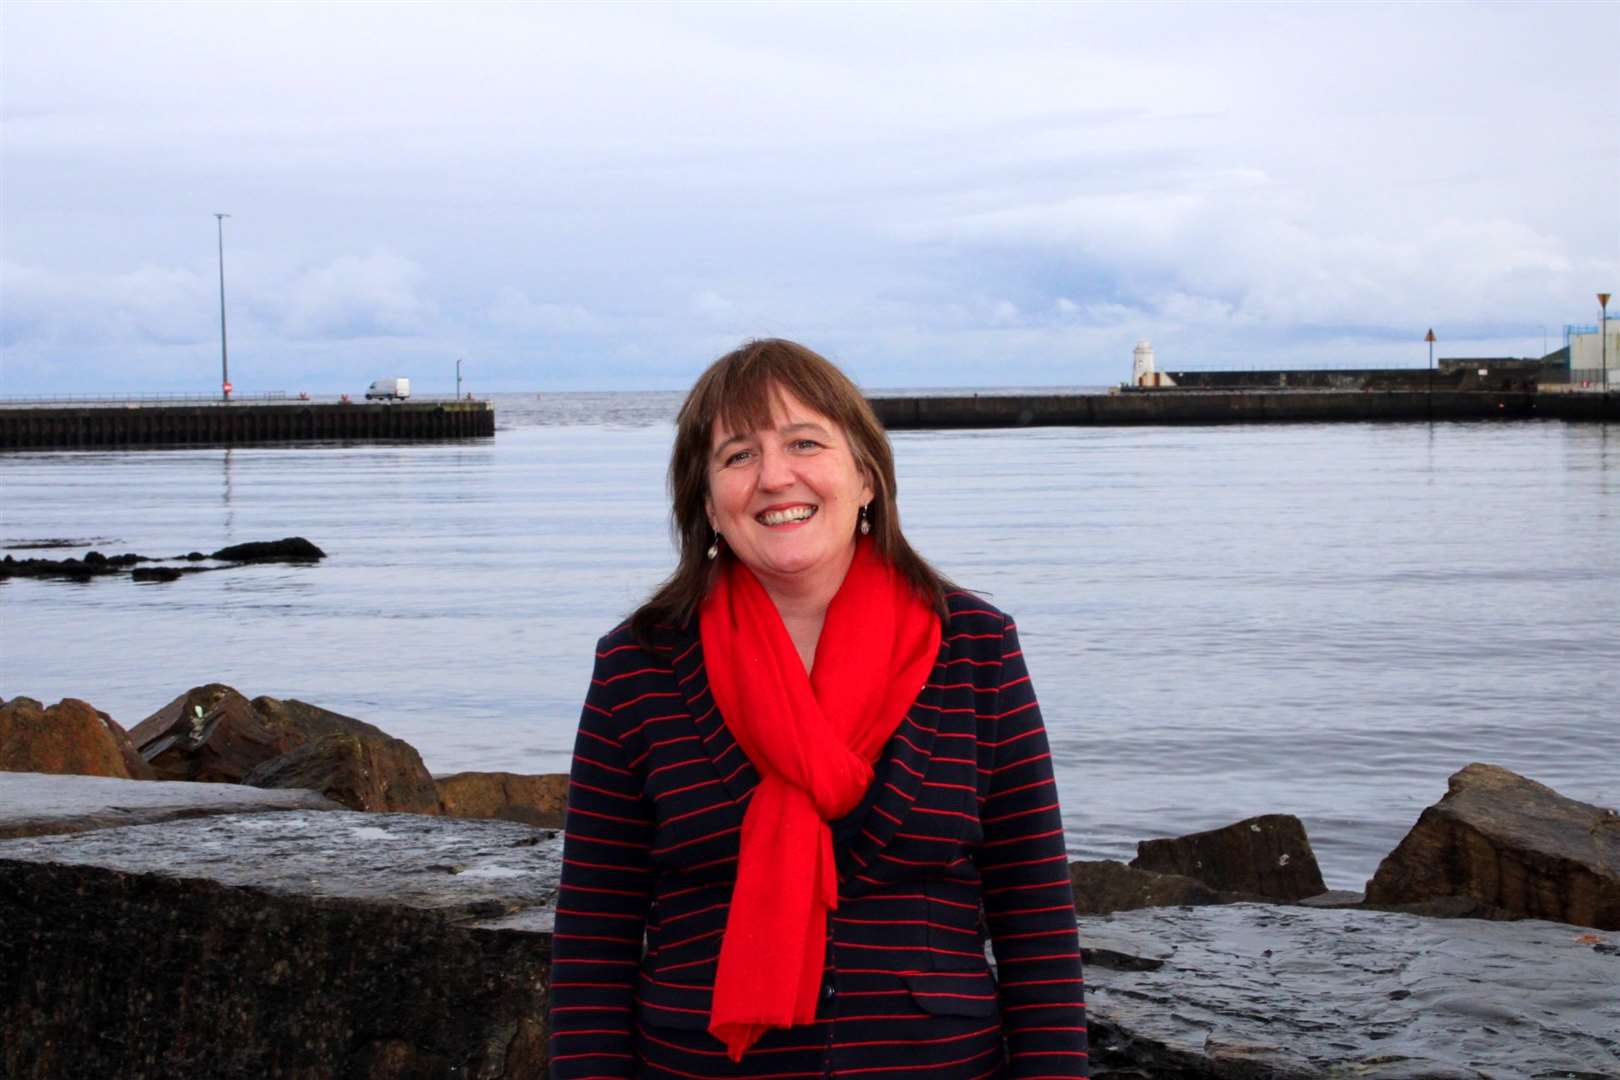 Maree Todd, SNP Candidate